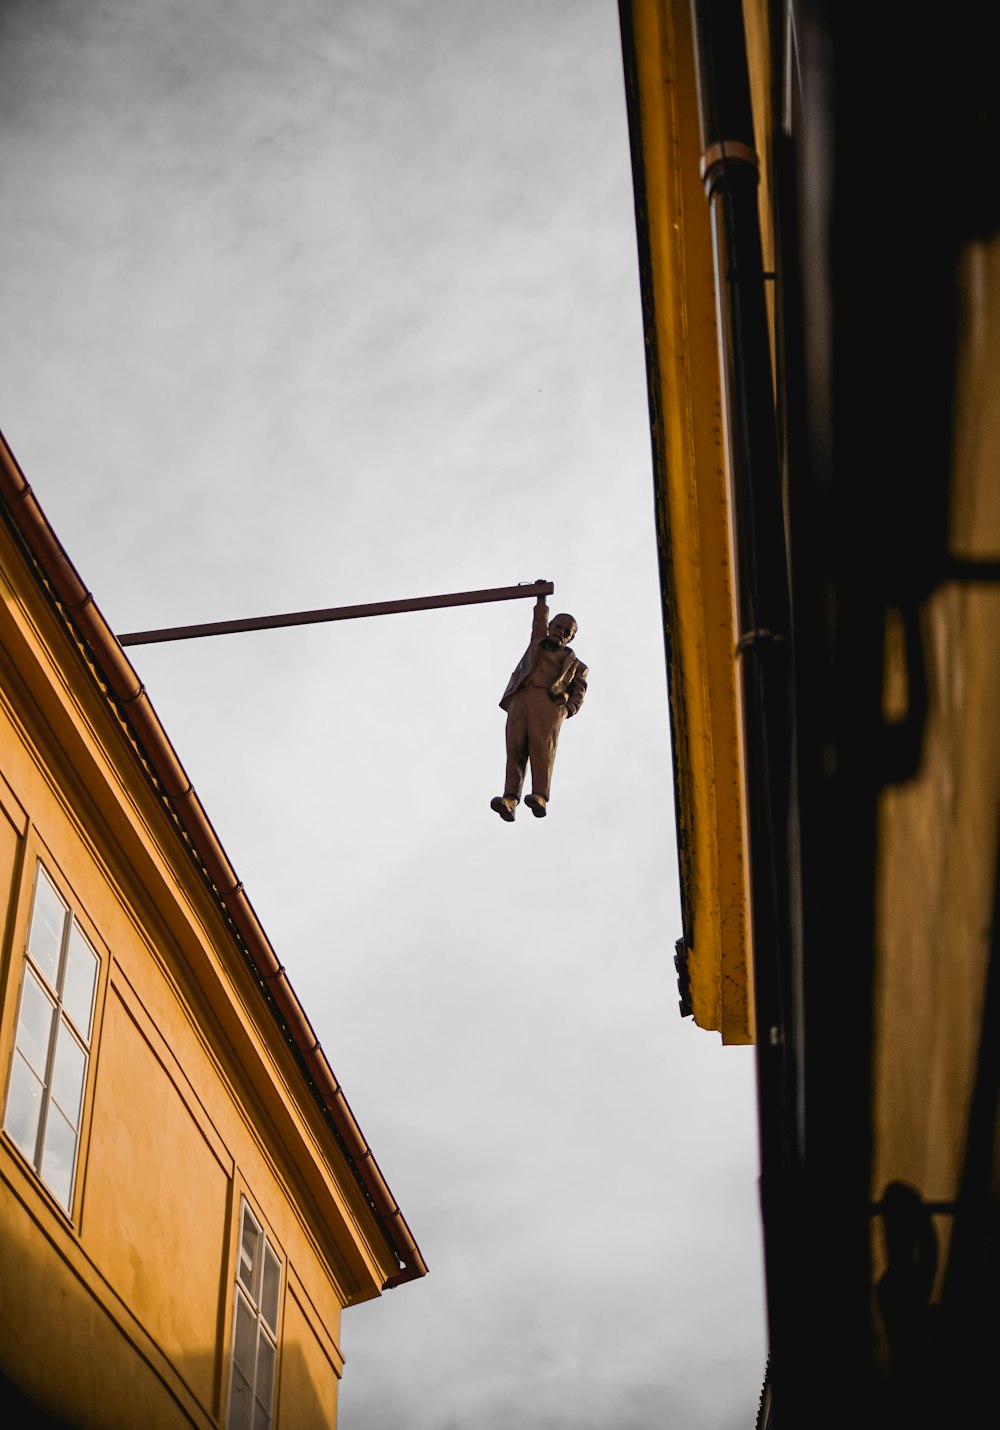 low-angle photography of statue of person hanging on rail during daytime